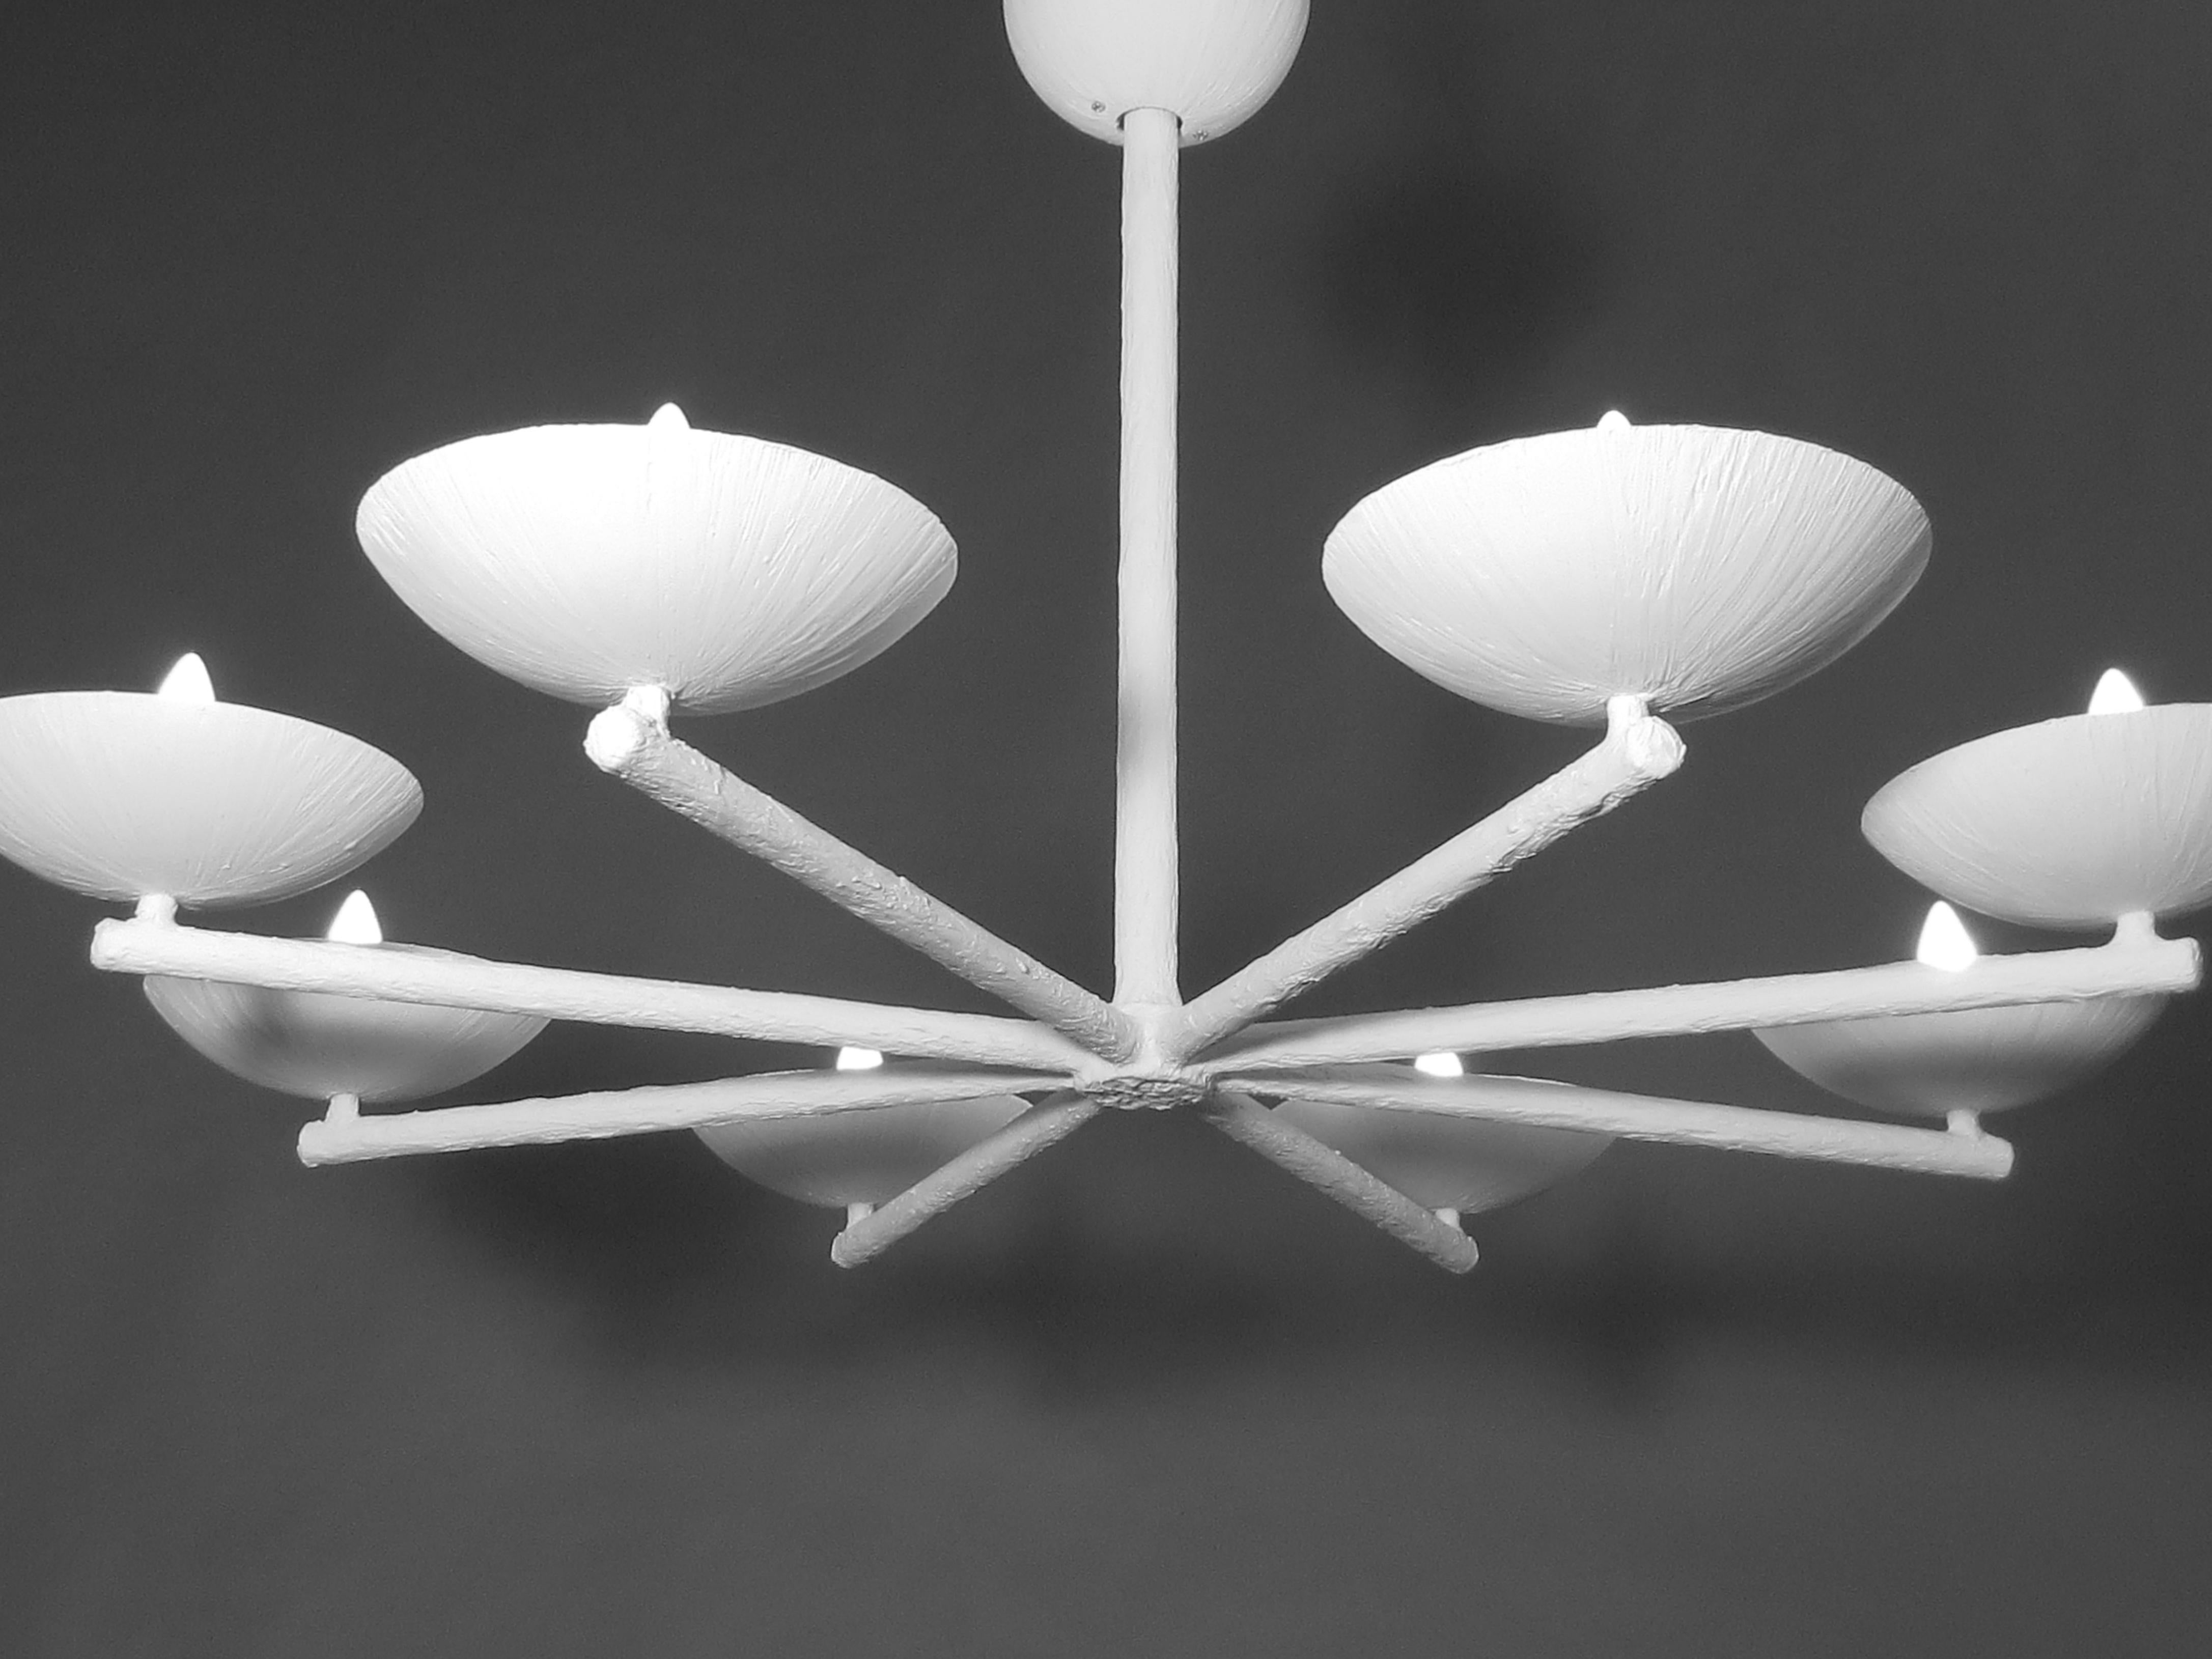 Eight spoke, eight-light and eight cup chandelier by Apsara Interiors. Up light. Can be ceiling fixture or chandelier length. Plaster and steel multi armed chandelier with a white enamel finish. May include ball, ceiling cap along with matching